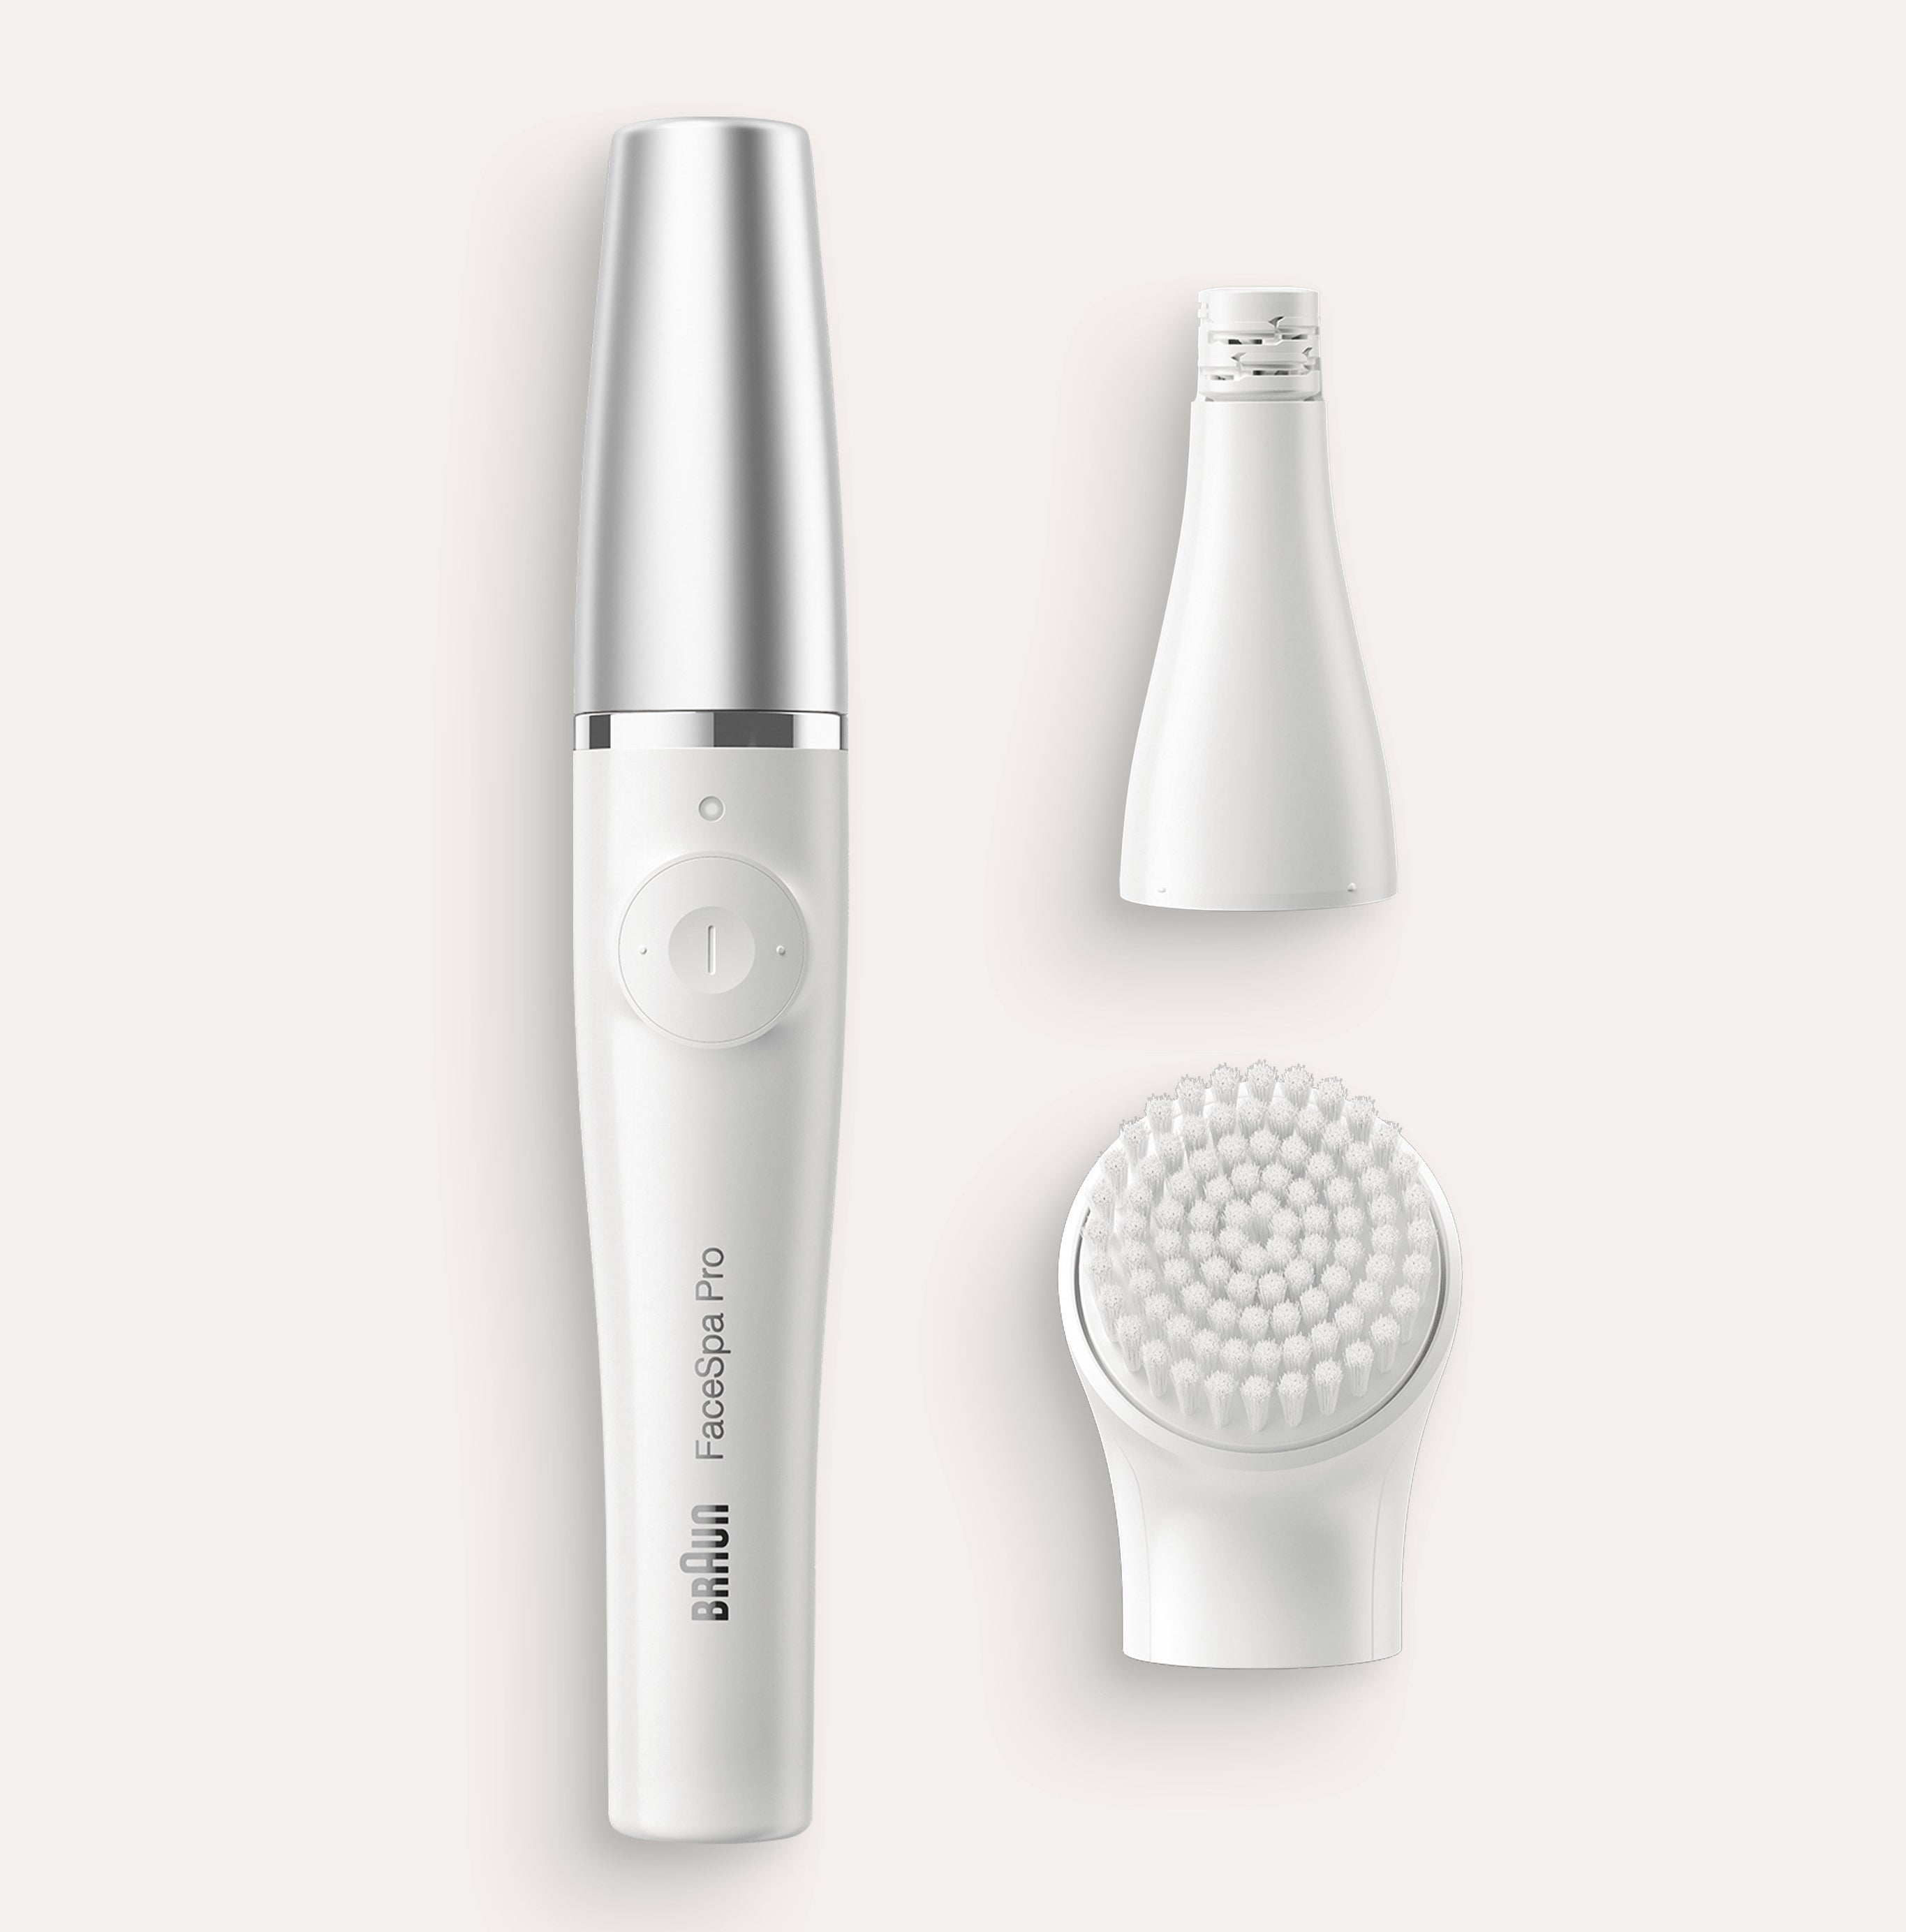 The epilator kit with two attachment heads for removing short hair or fine hair 